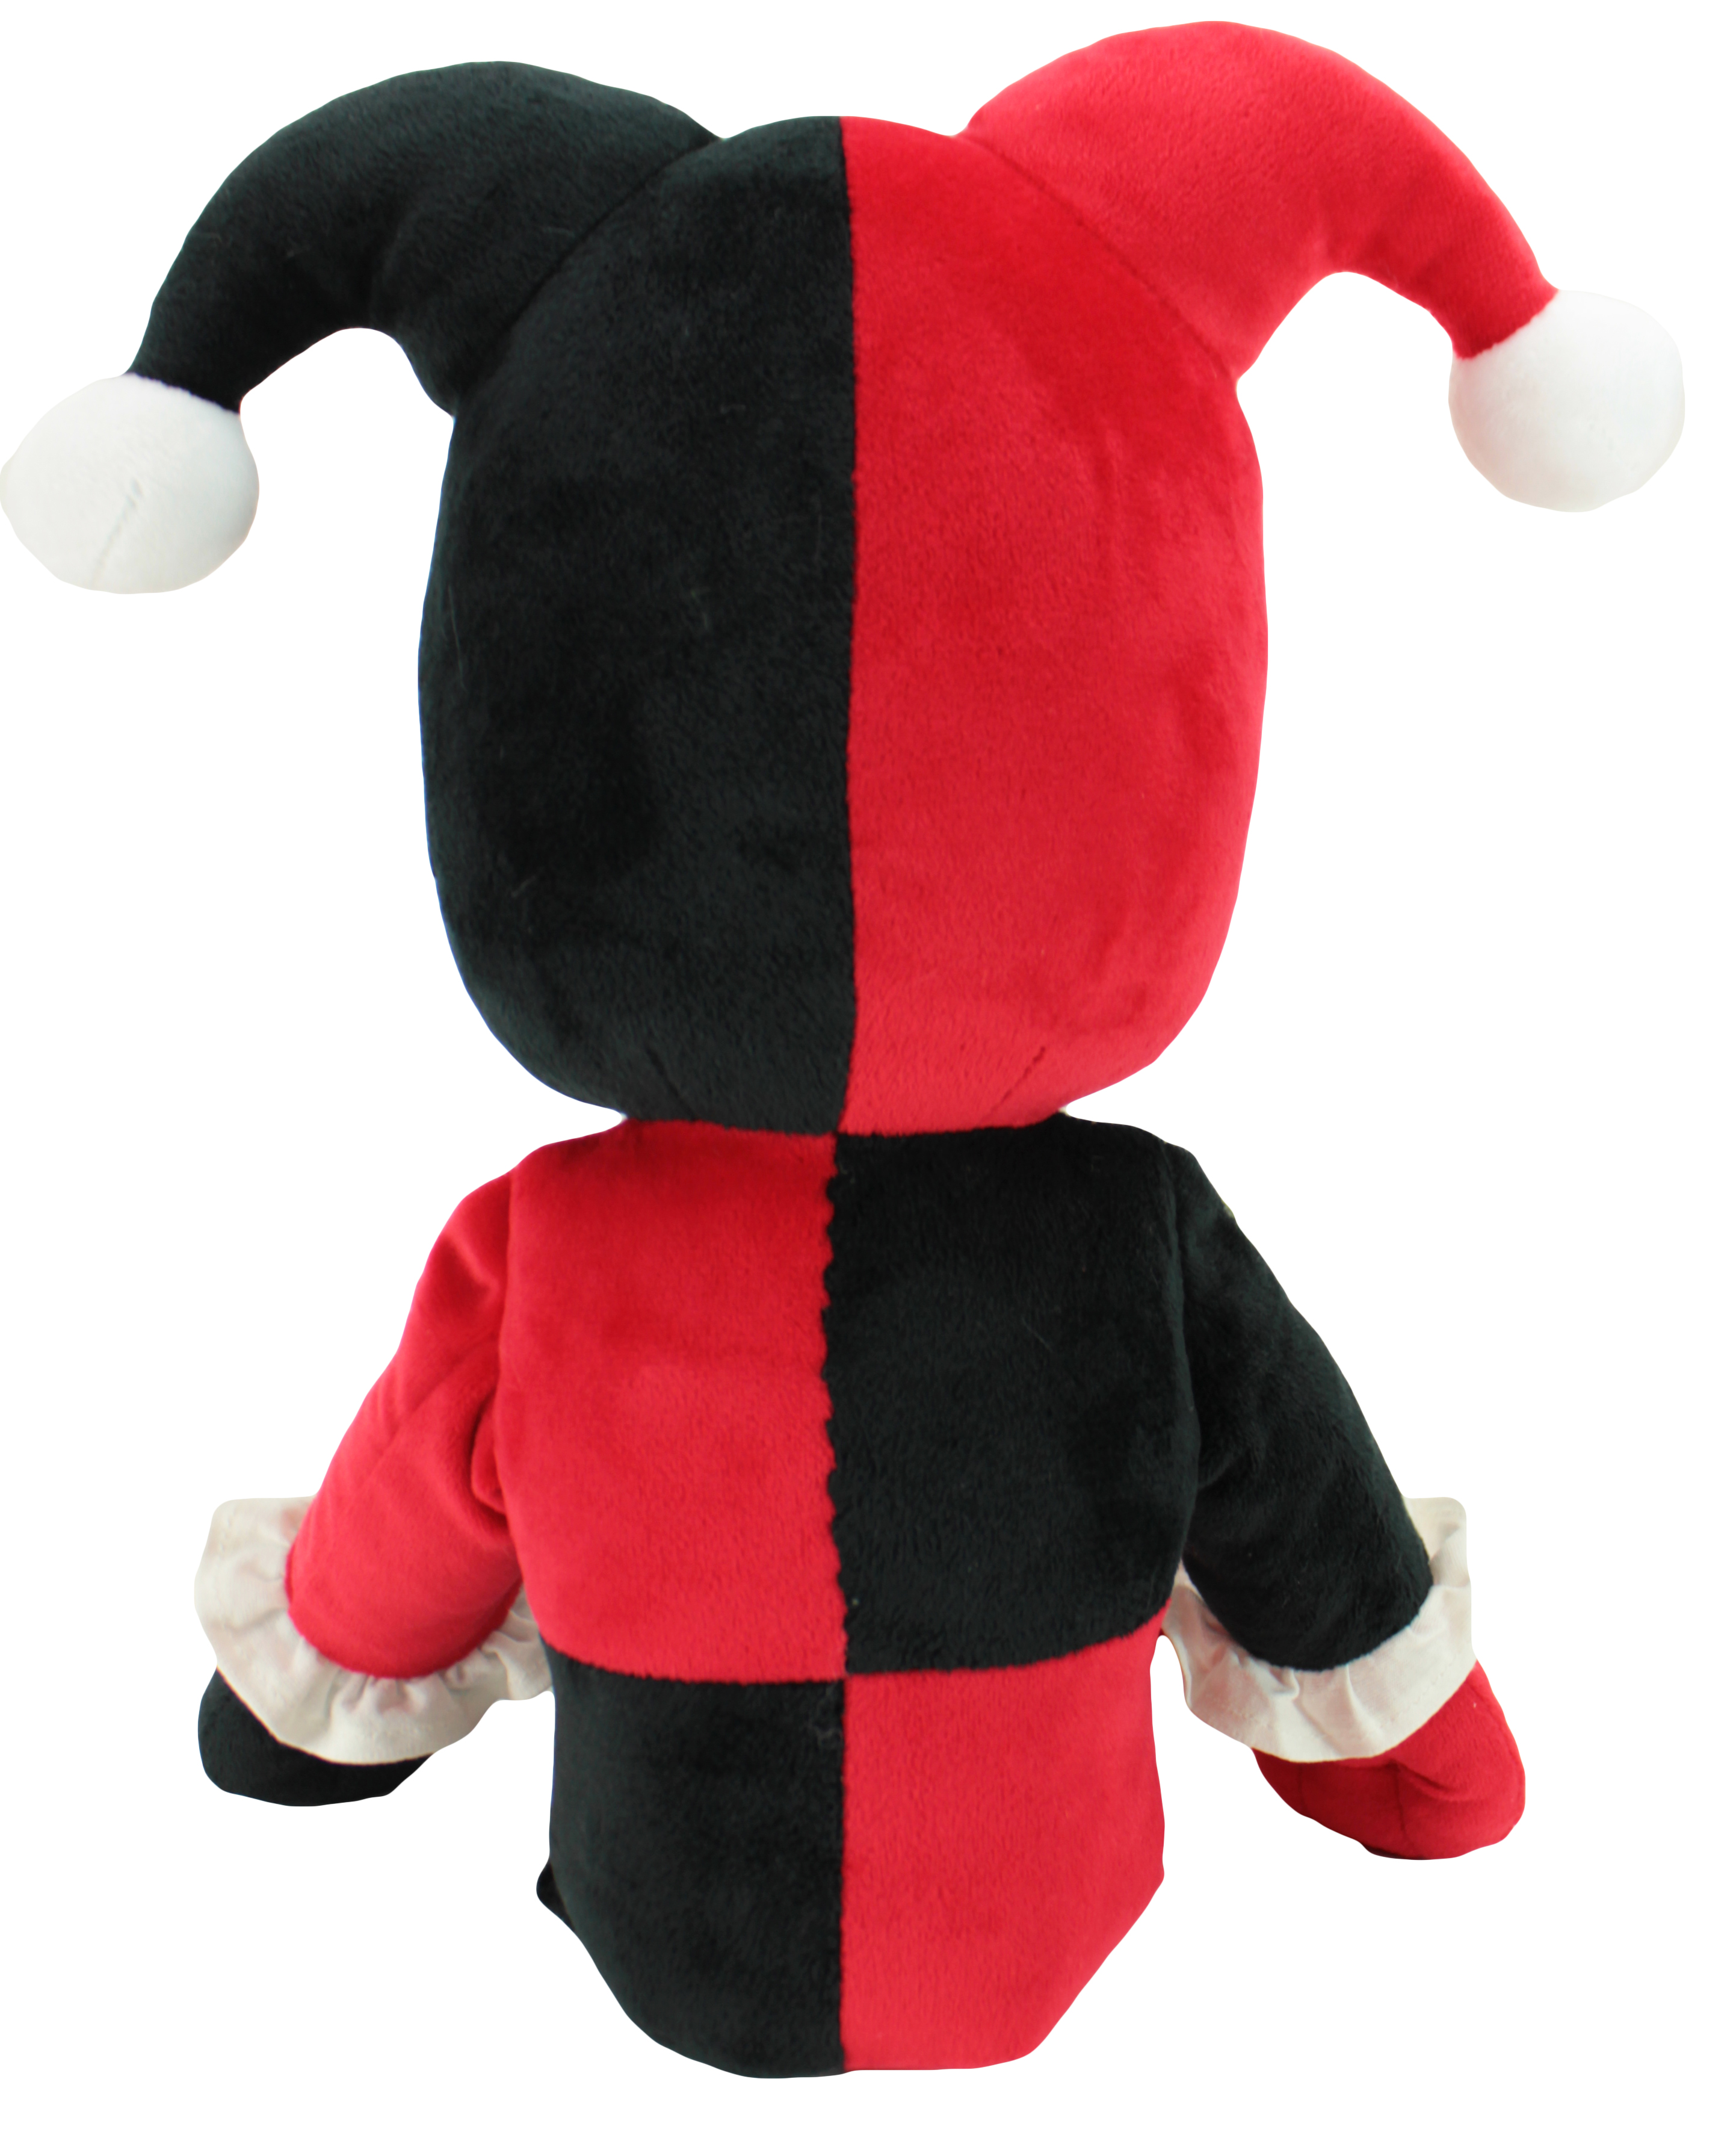 Justice League Harley Quinn Plush Character - image 4 of 4